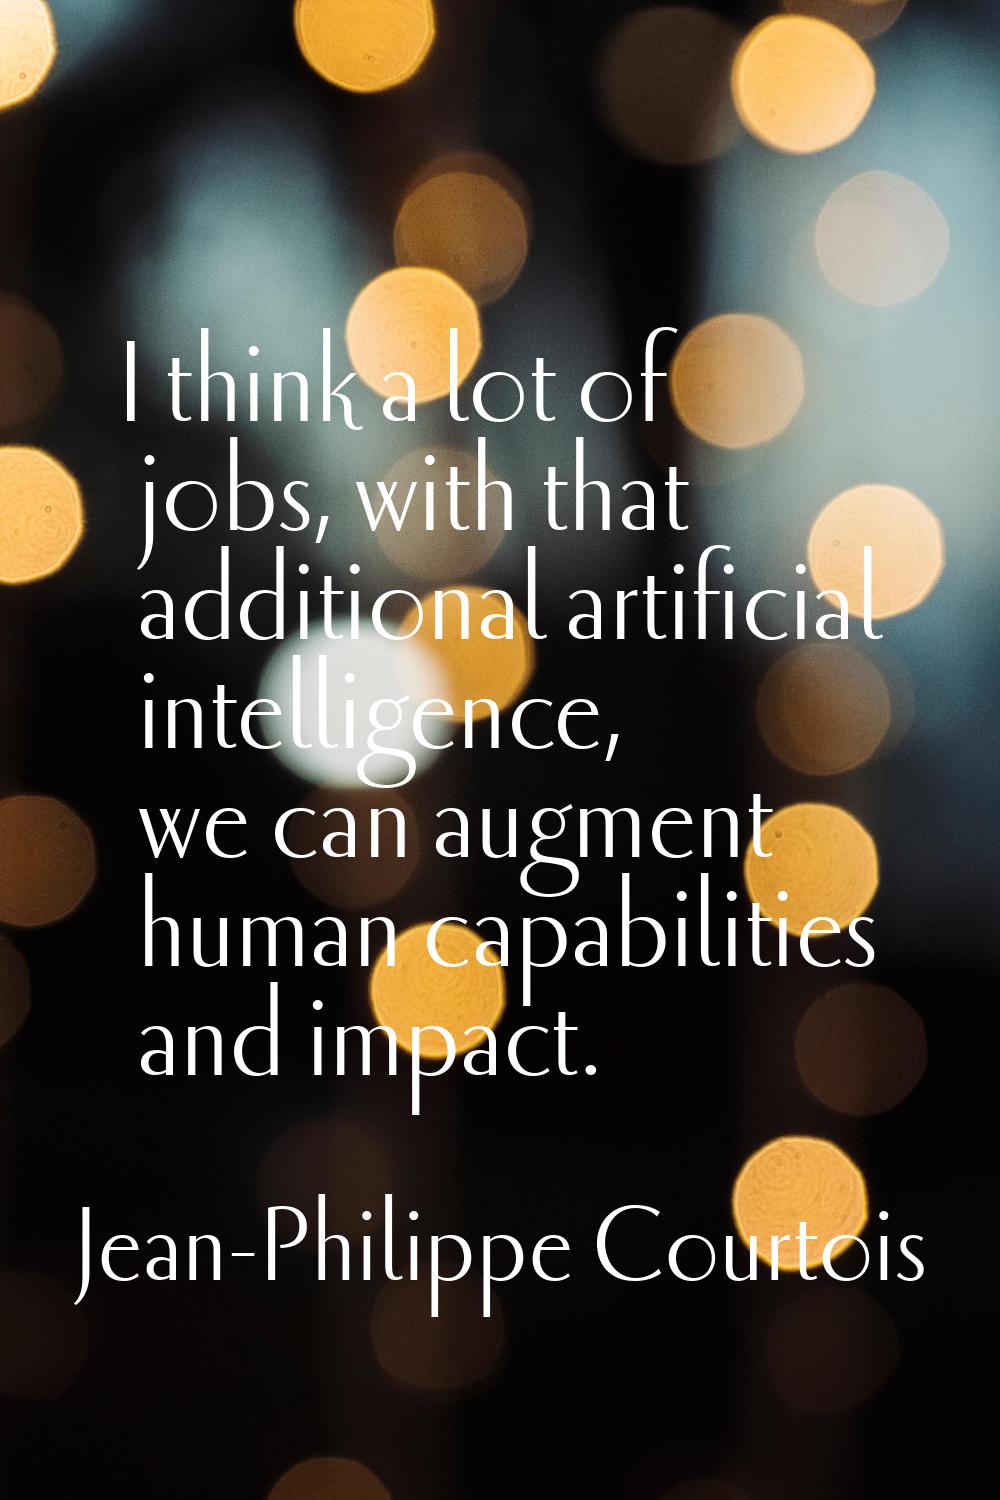 I think a lot of jobs, with that additional artificial intelligence, we can augment human capabilit